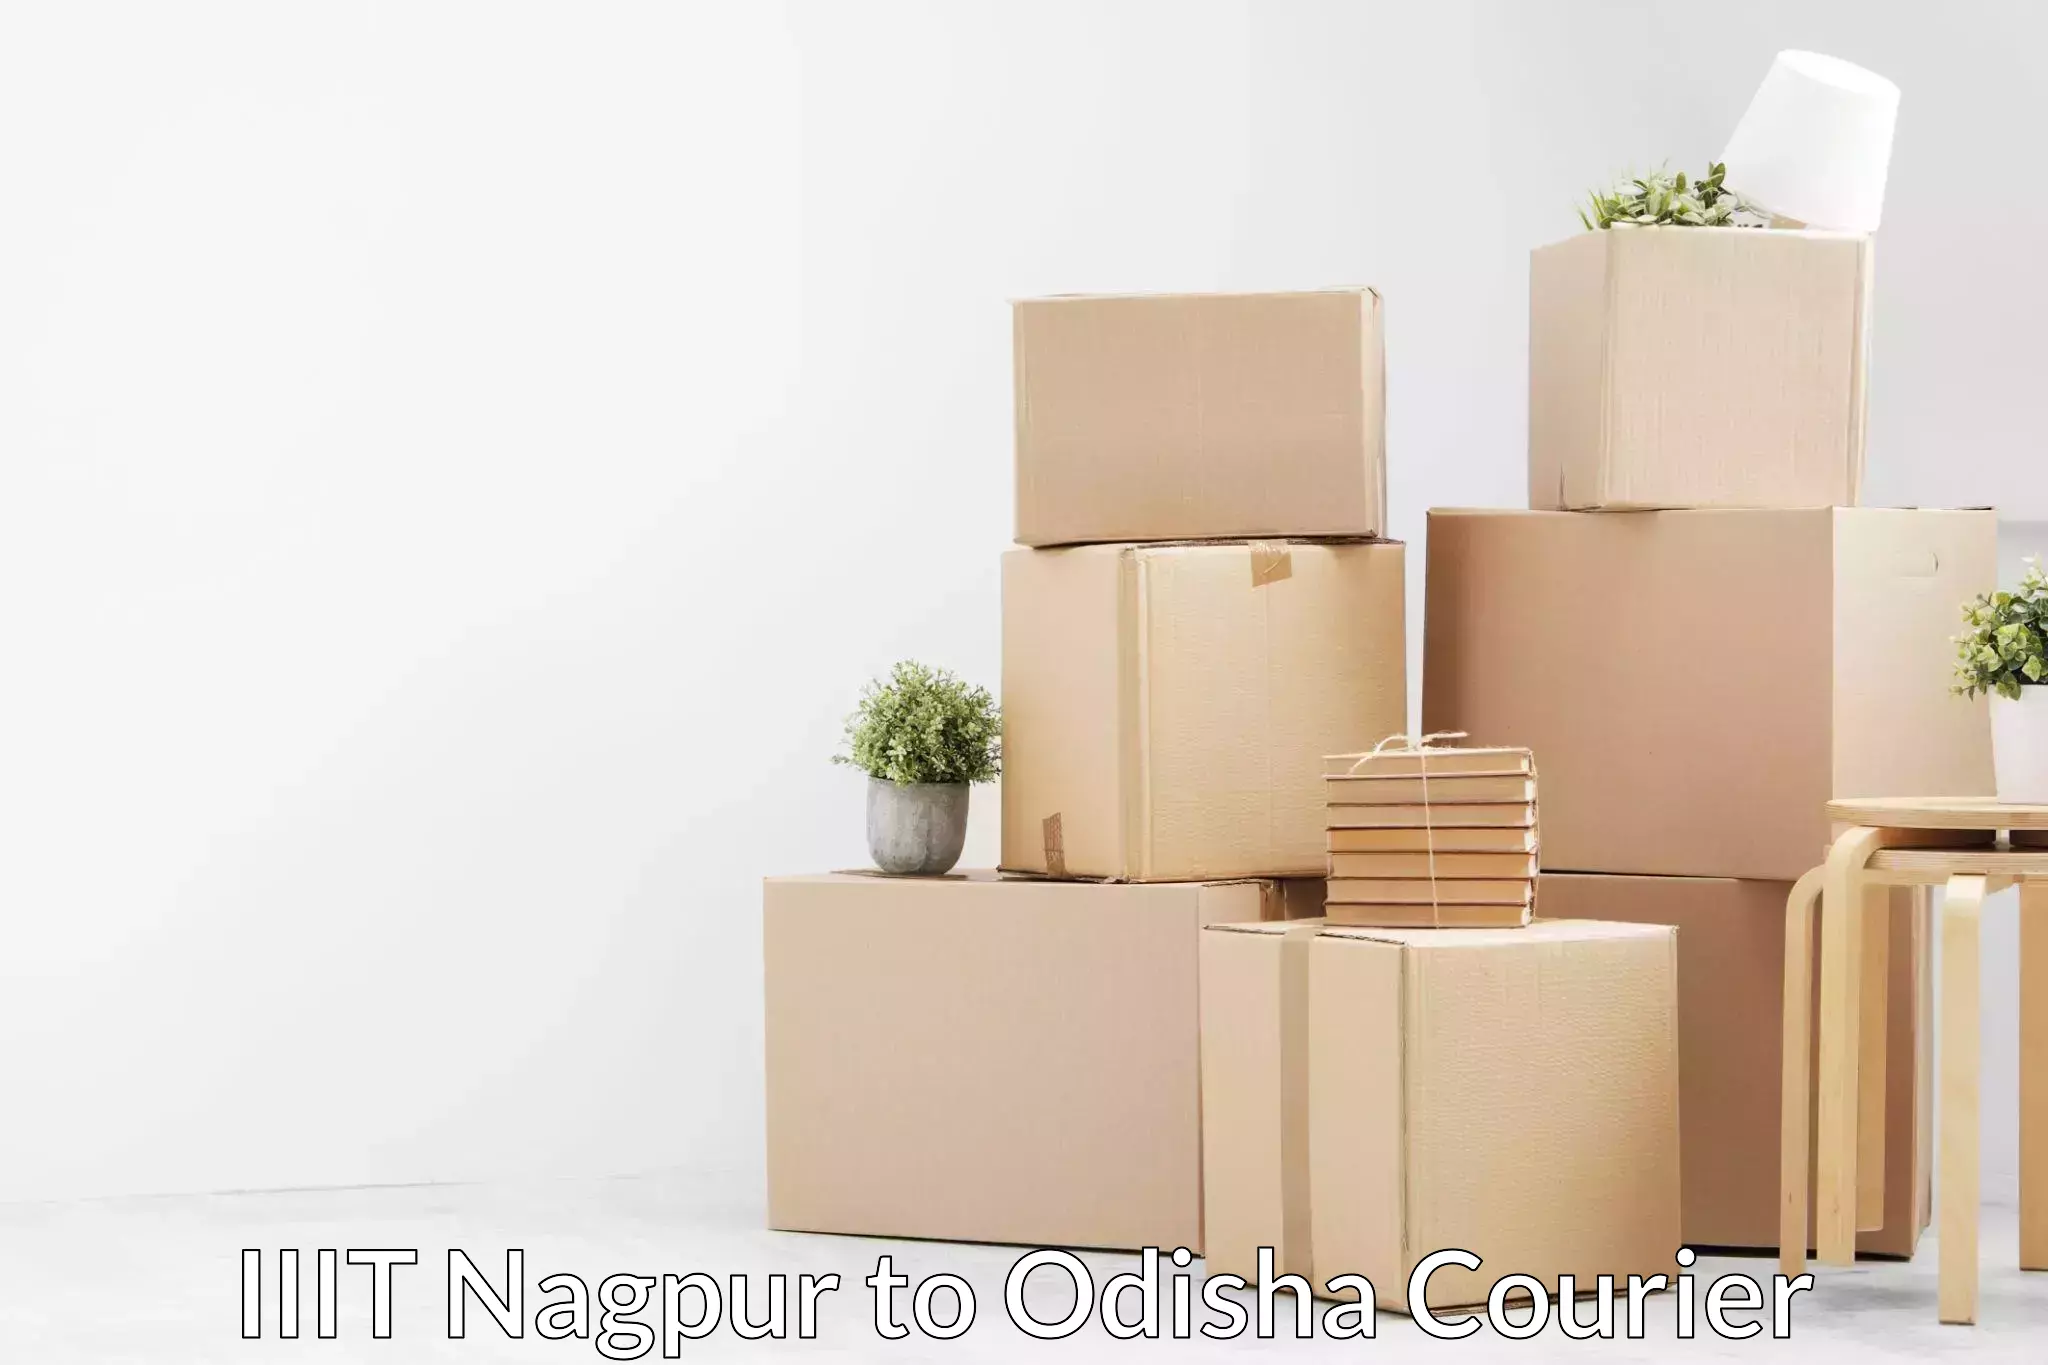 Efficient relocation services in IIIT Nagpur to Chandbali